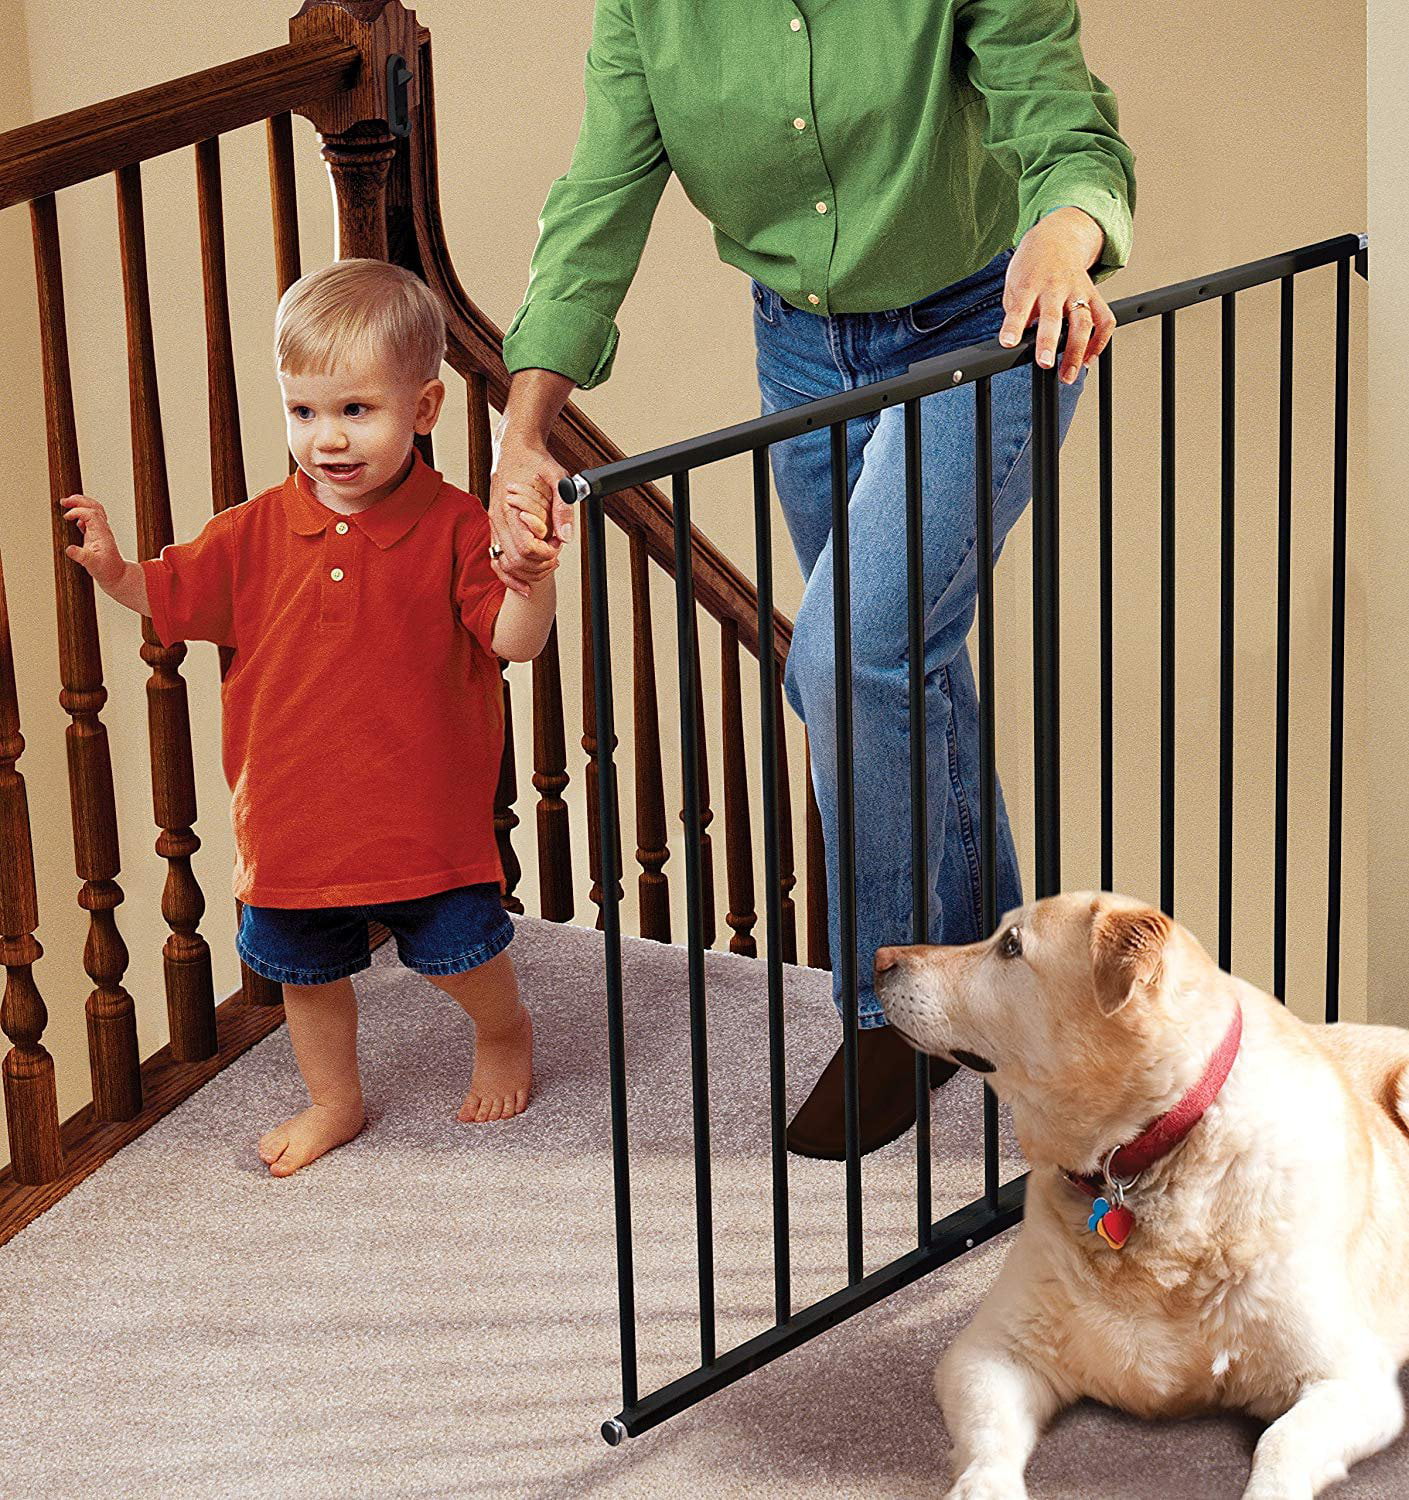 Best Walk-Through Baby Safety Gate with Quick-Release Sliding Door Lock Hoovy Original Child & Pet Gate Hallway Goes with Home Decor Stairway Room Divider for Small Kids & Dogs